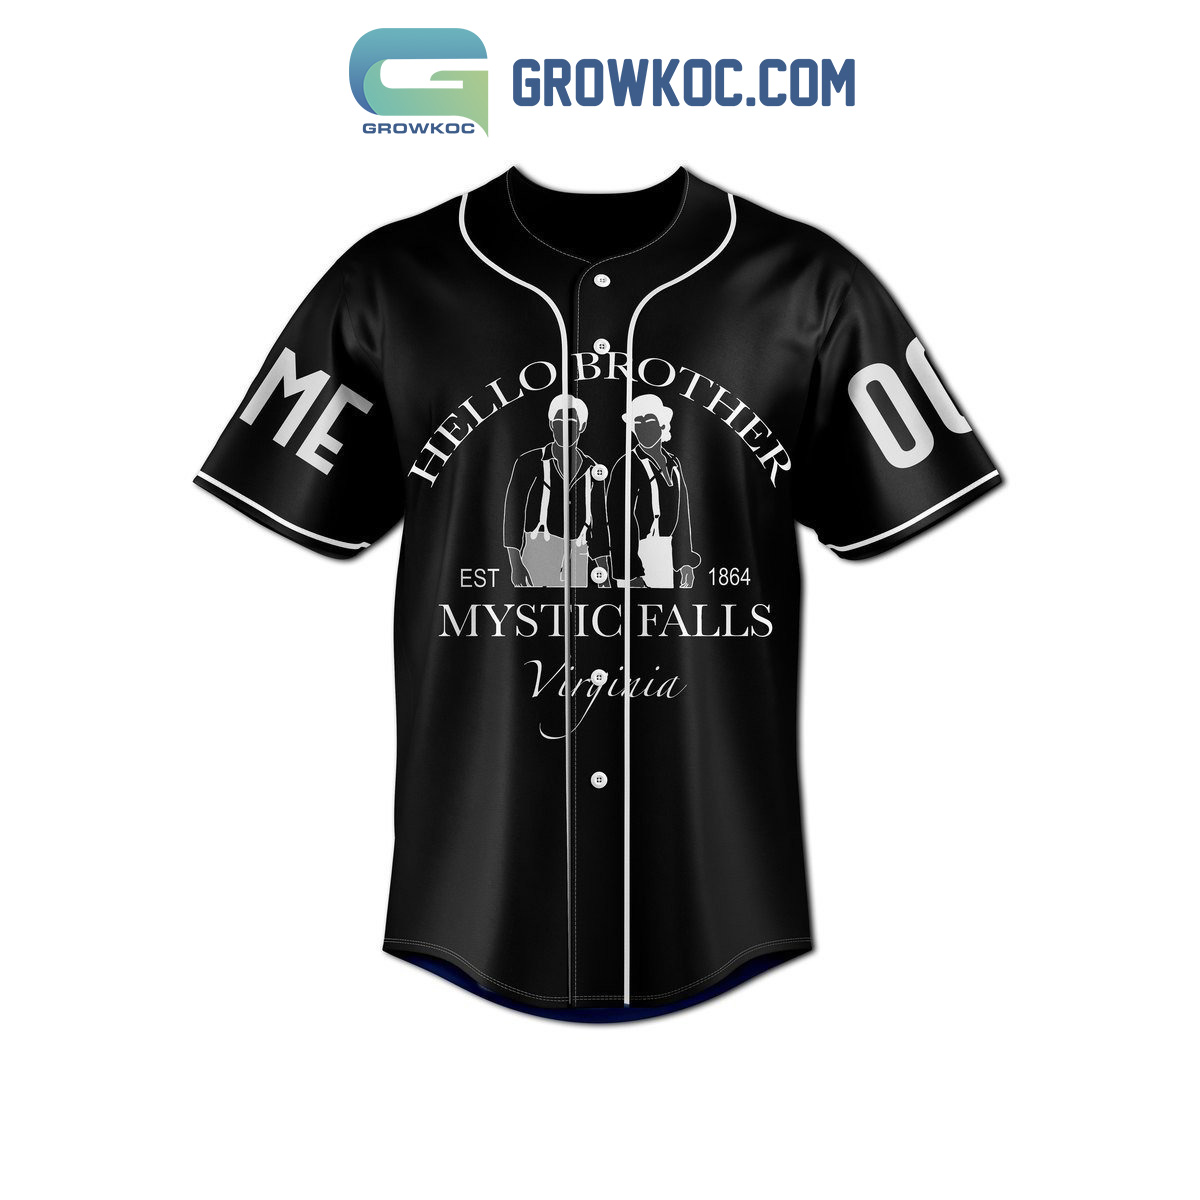 Hello Brother Mystic Falls Virginia Personalized Baseball Jersey